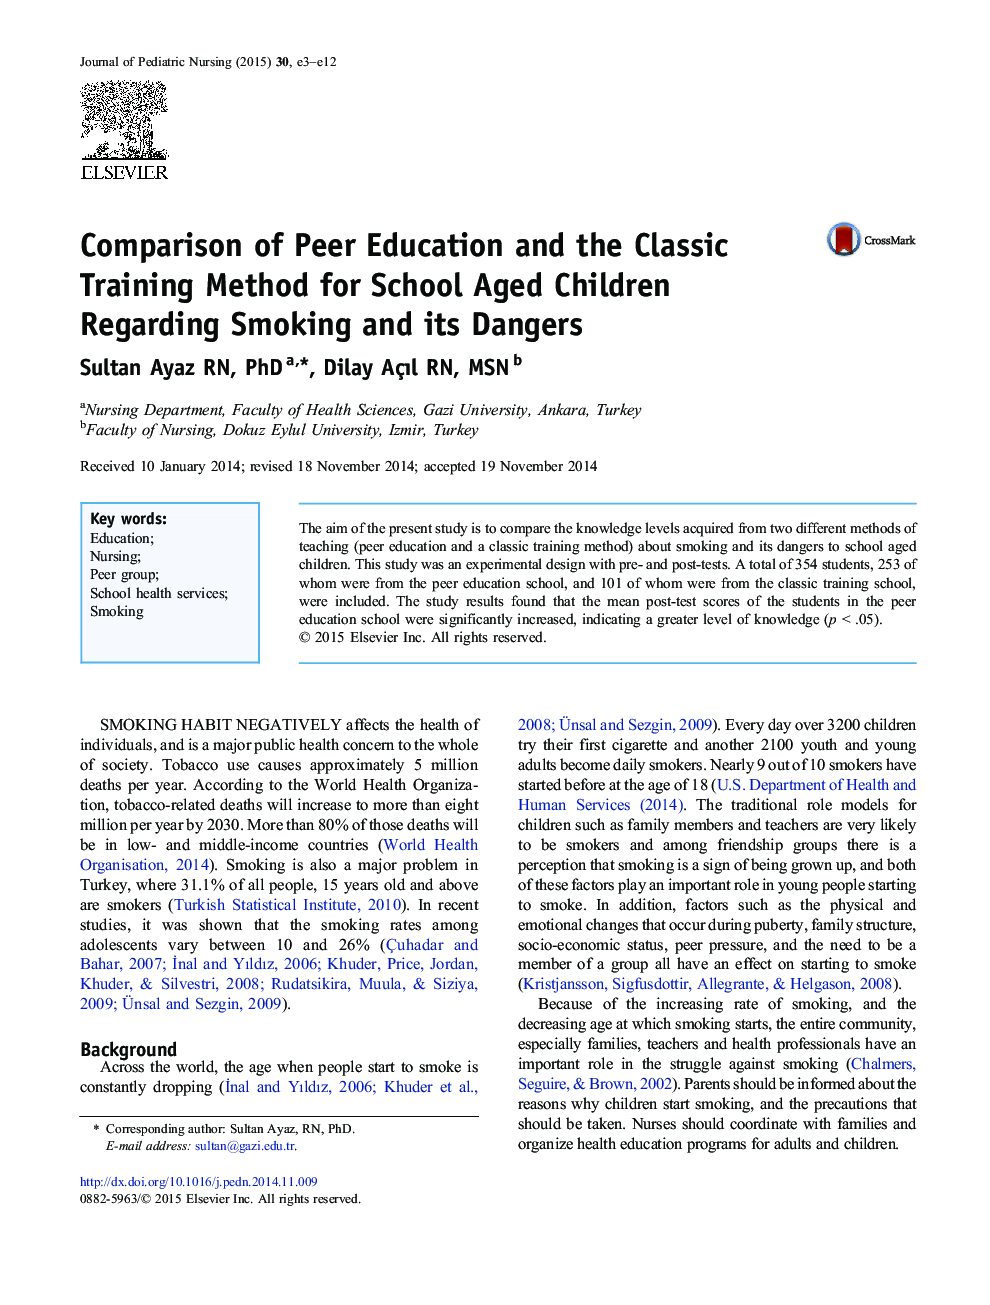 Comparison of Peer Education and the Classic Training Method for School Aged Children Regarding Smoking and its Dangers